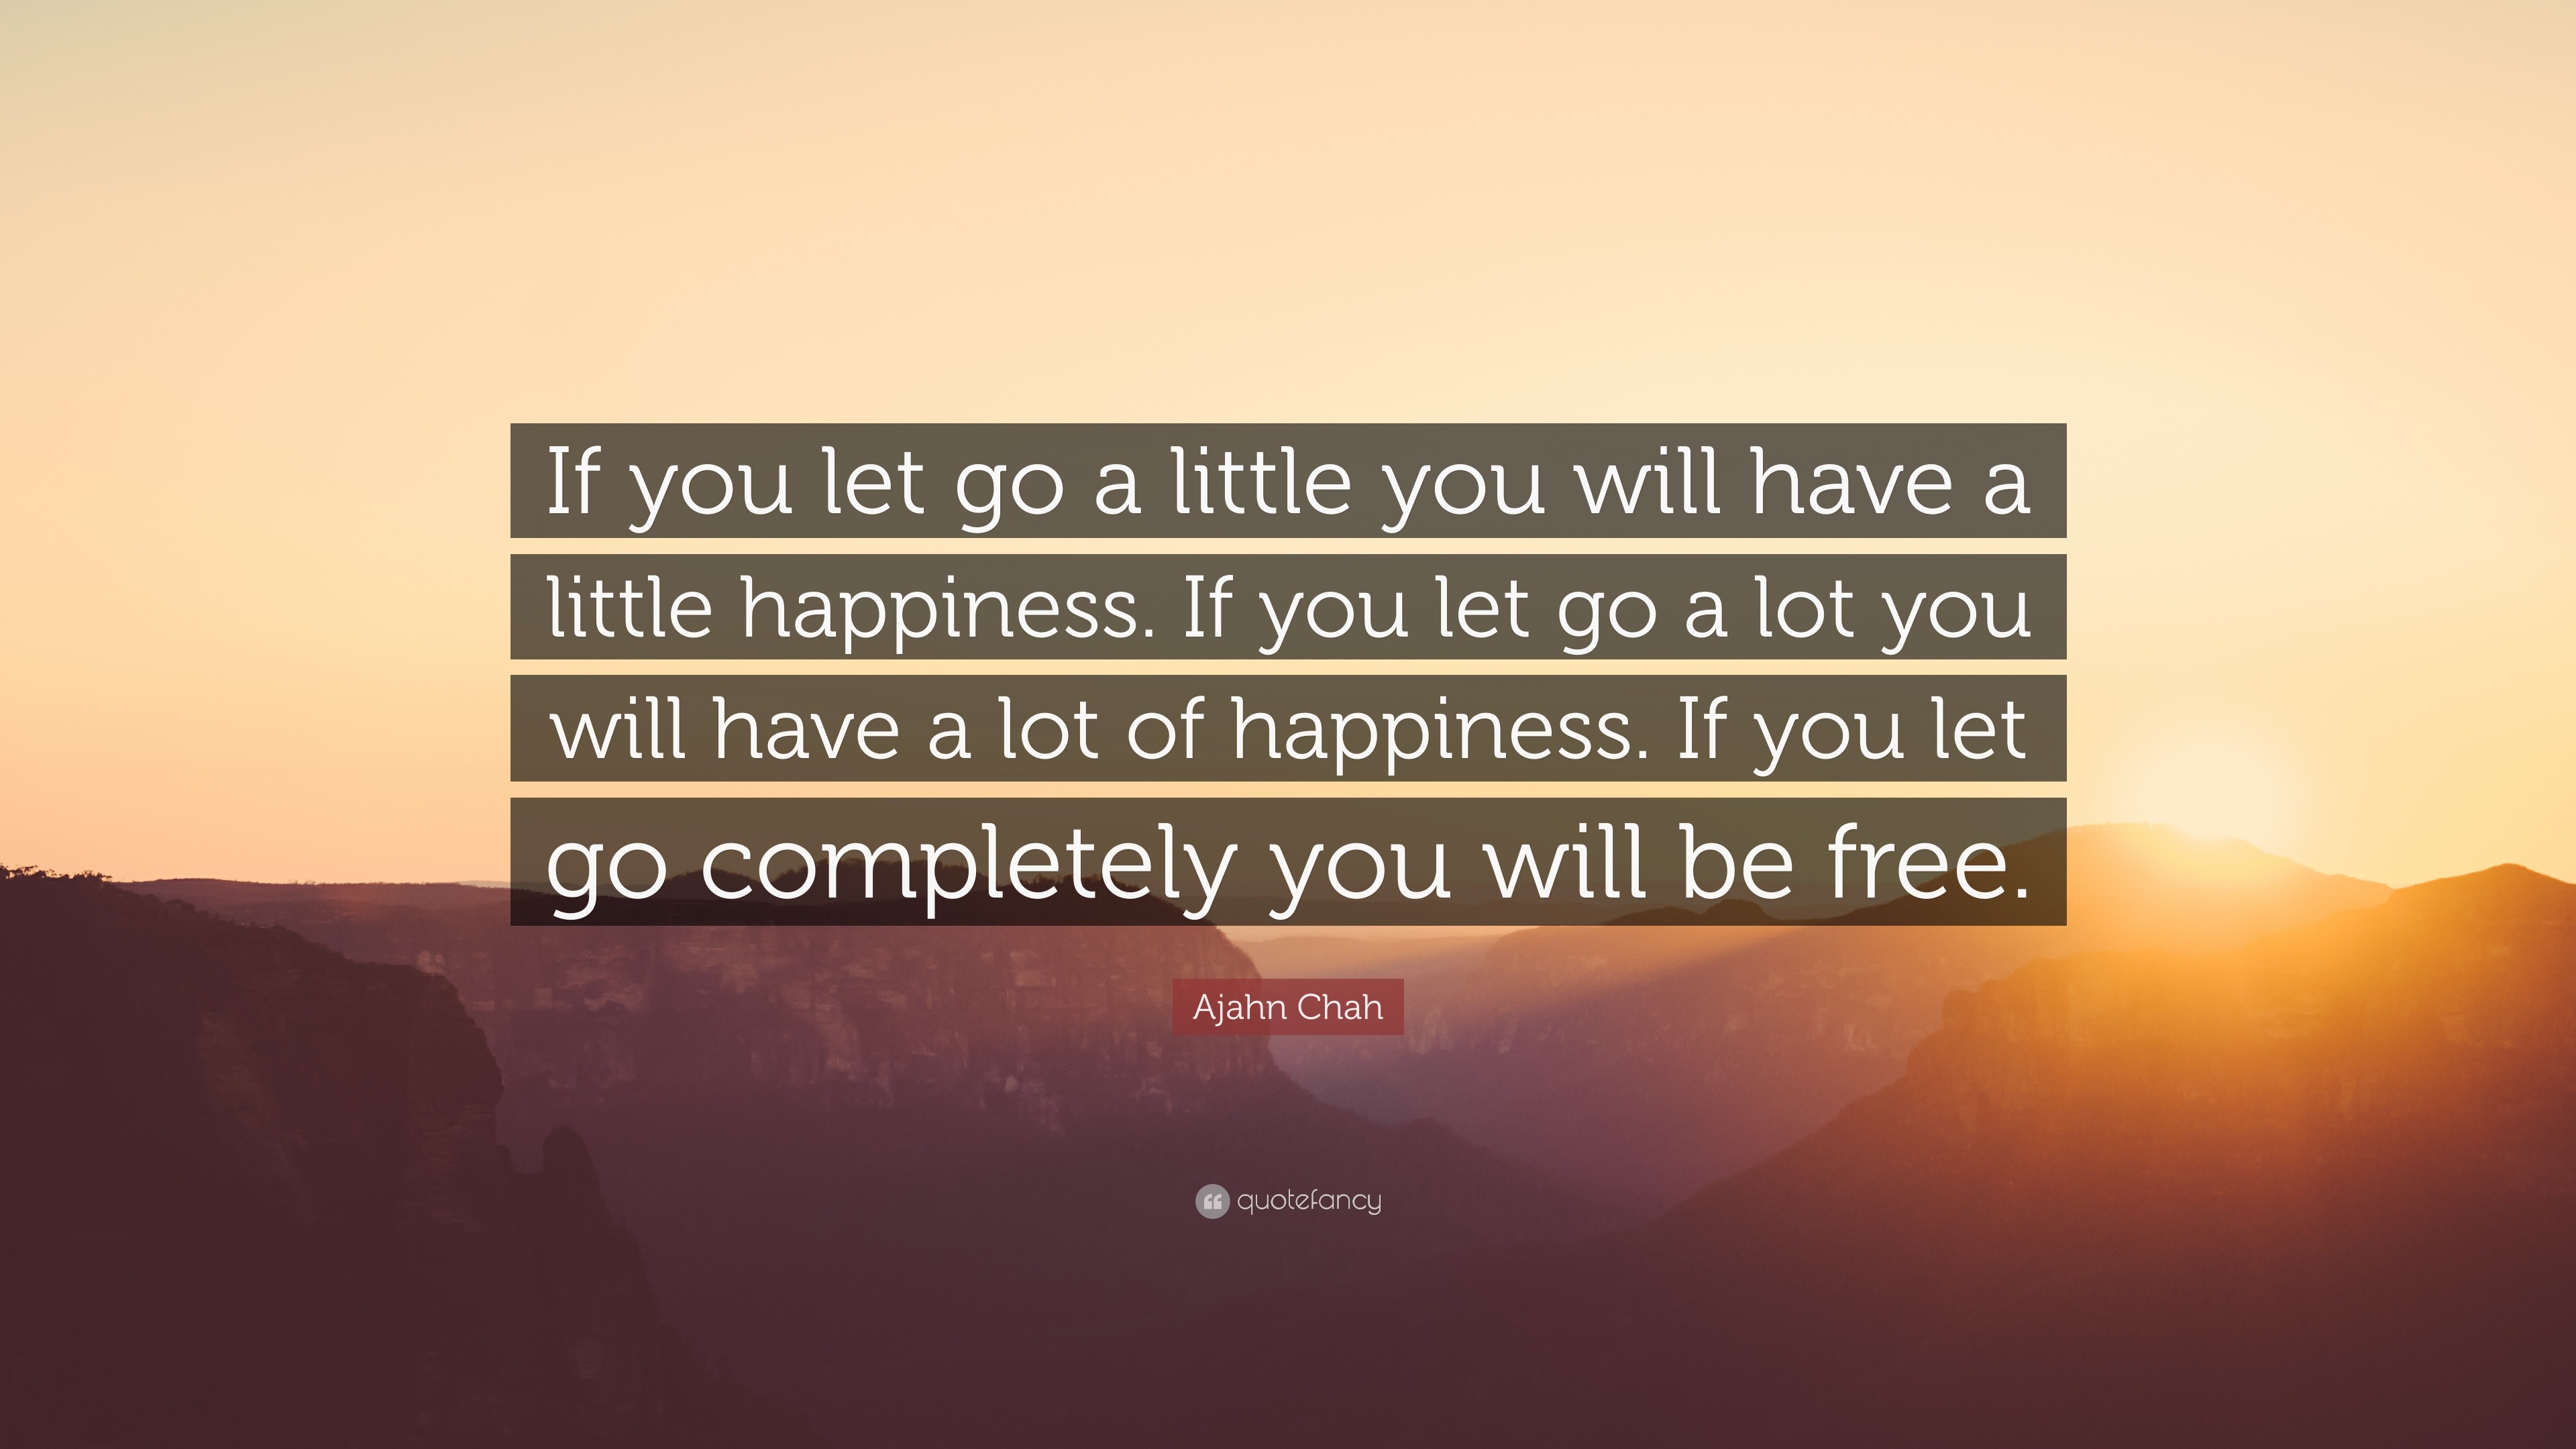 Ajahn Chah Quote If You Let Go A Little You Will Have A Little Happiness If You Let Go A Lot You Will Have A Lot Of Happiness If You Le 10